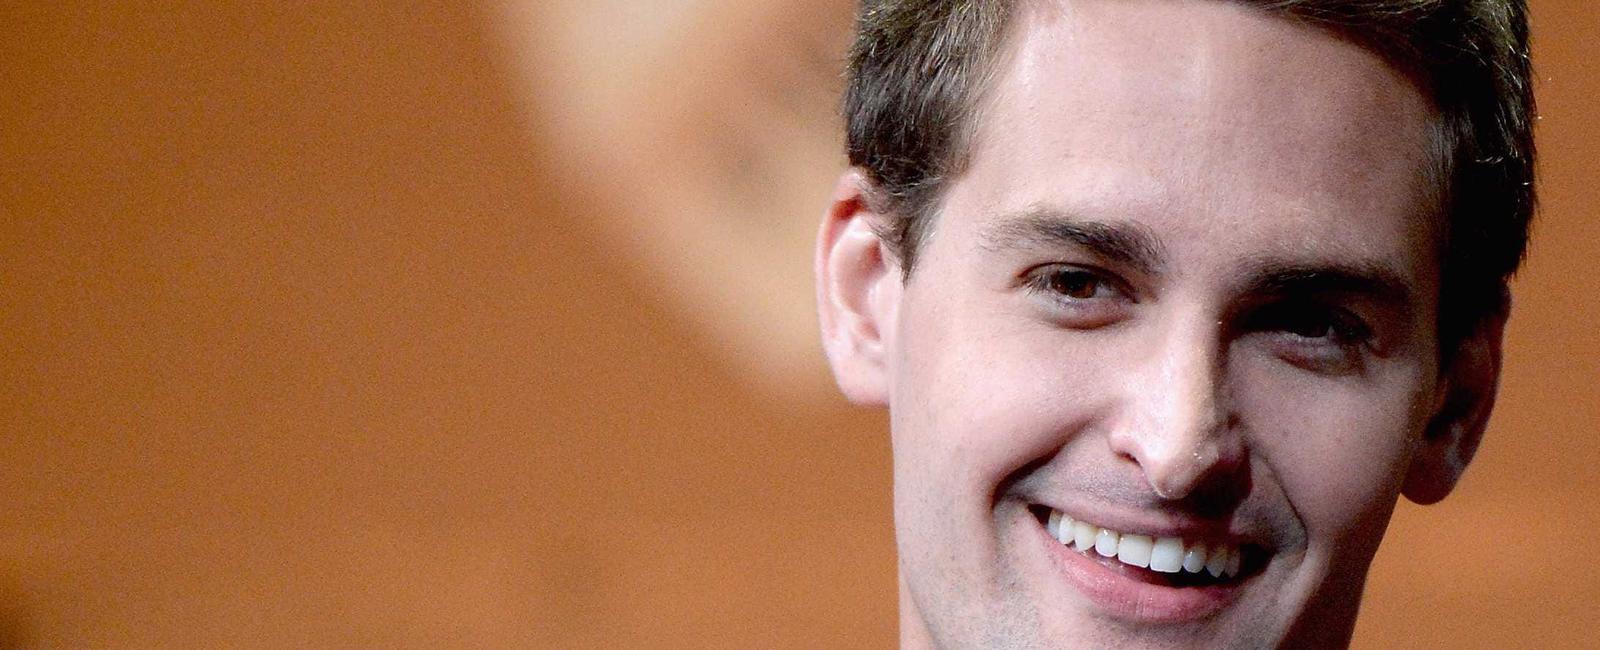 The co founder and ceo of snapchat 23 year old evan spiegel turned down an offer of 3 billion from facebook and then a 4 billion bid from google